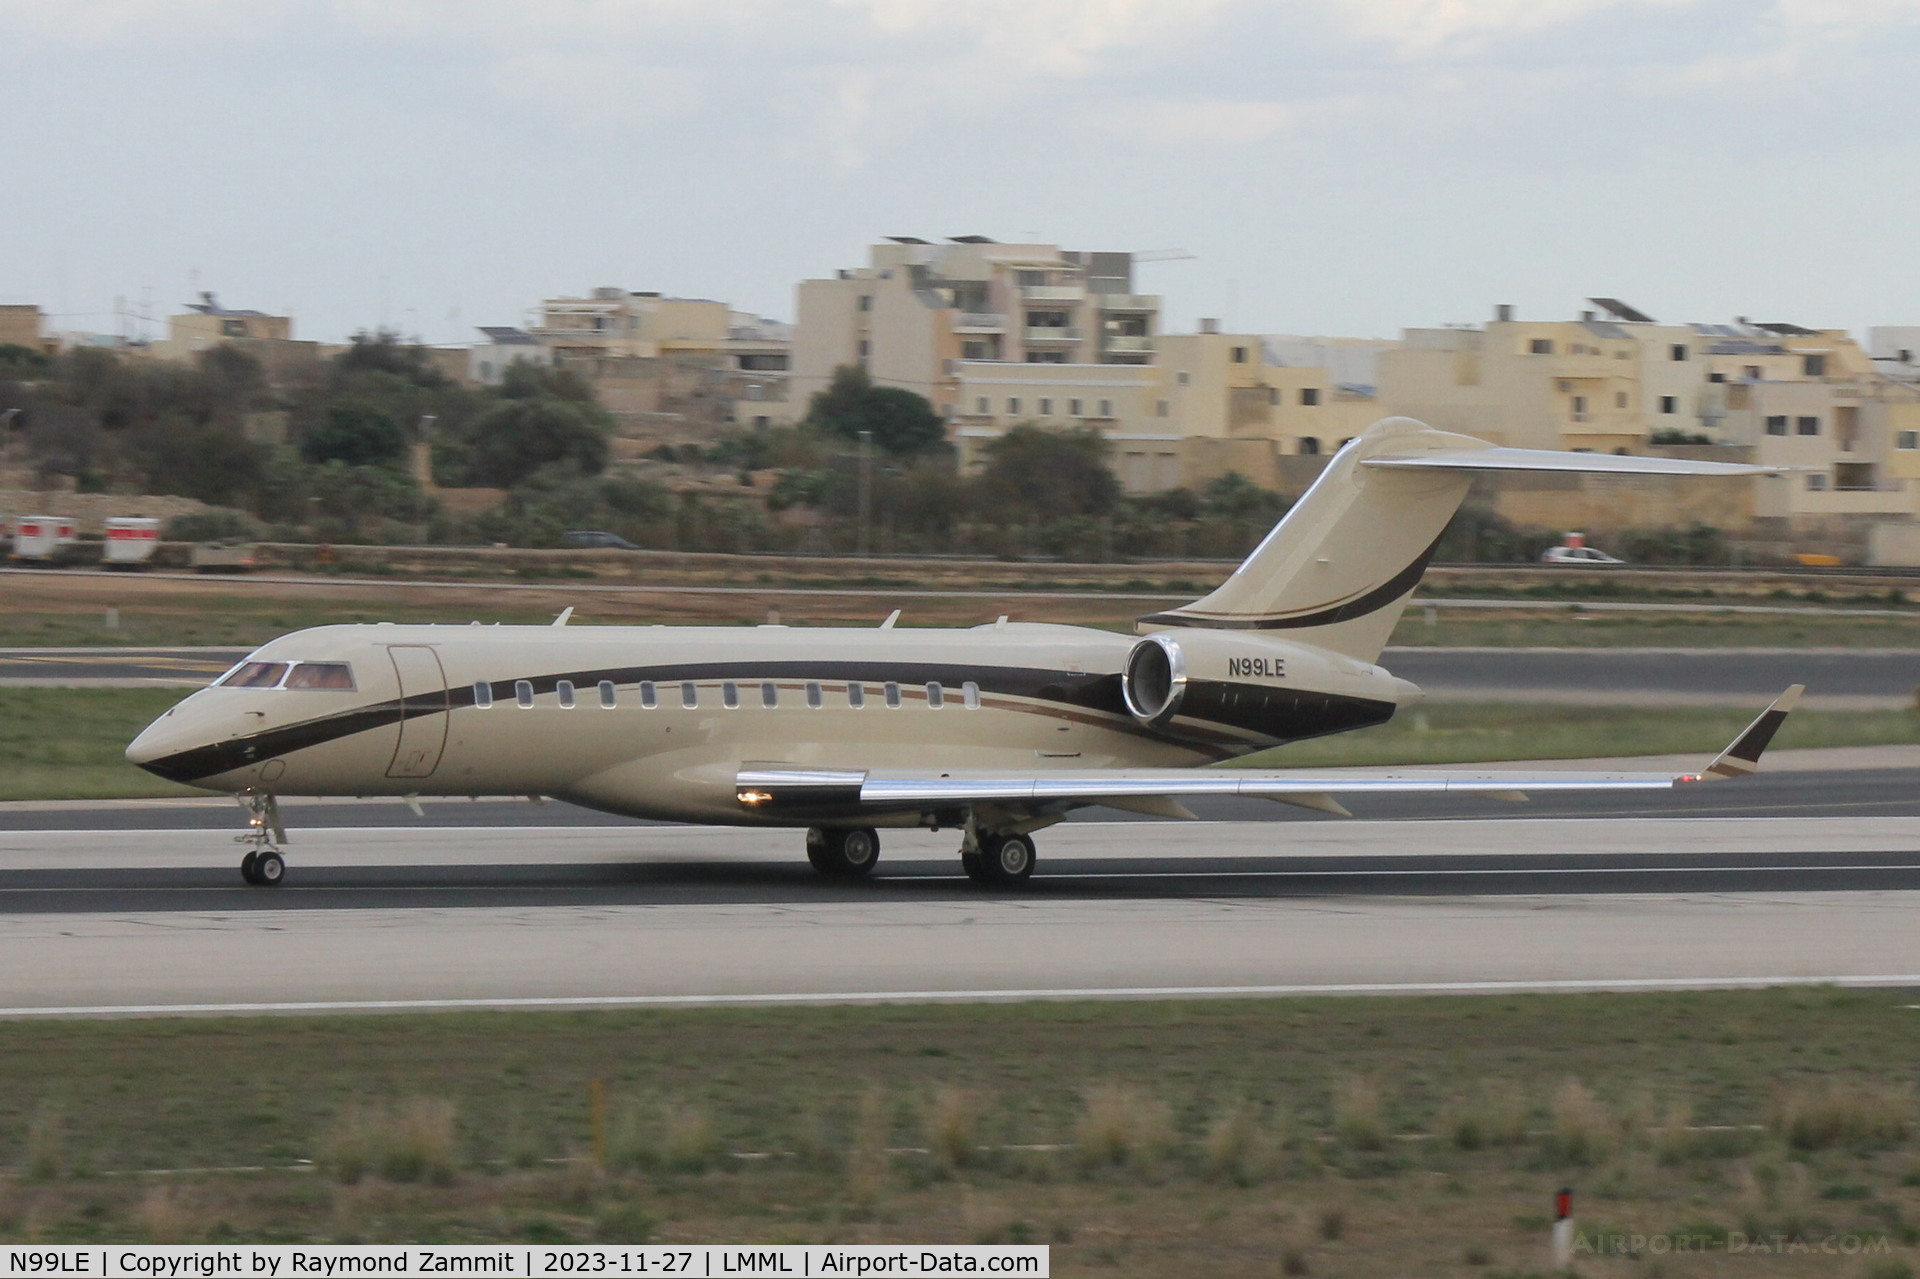 N99LE, 2014 Bombardier BD-700-1A10 Global 6000 C/N 9637, Bombardier BD-700 1A10 Global 6000 N99LE TVPX Aircraft Solutions